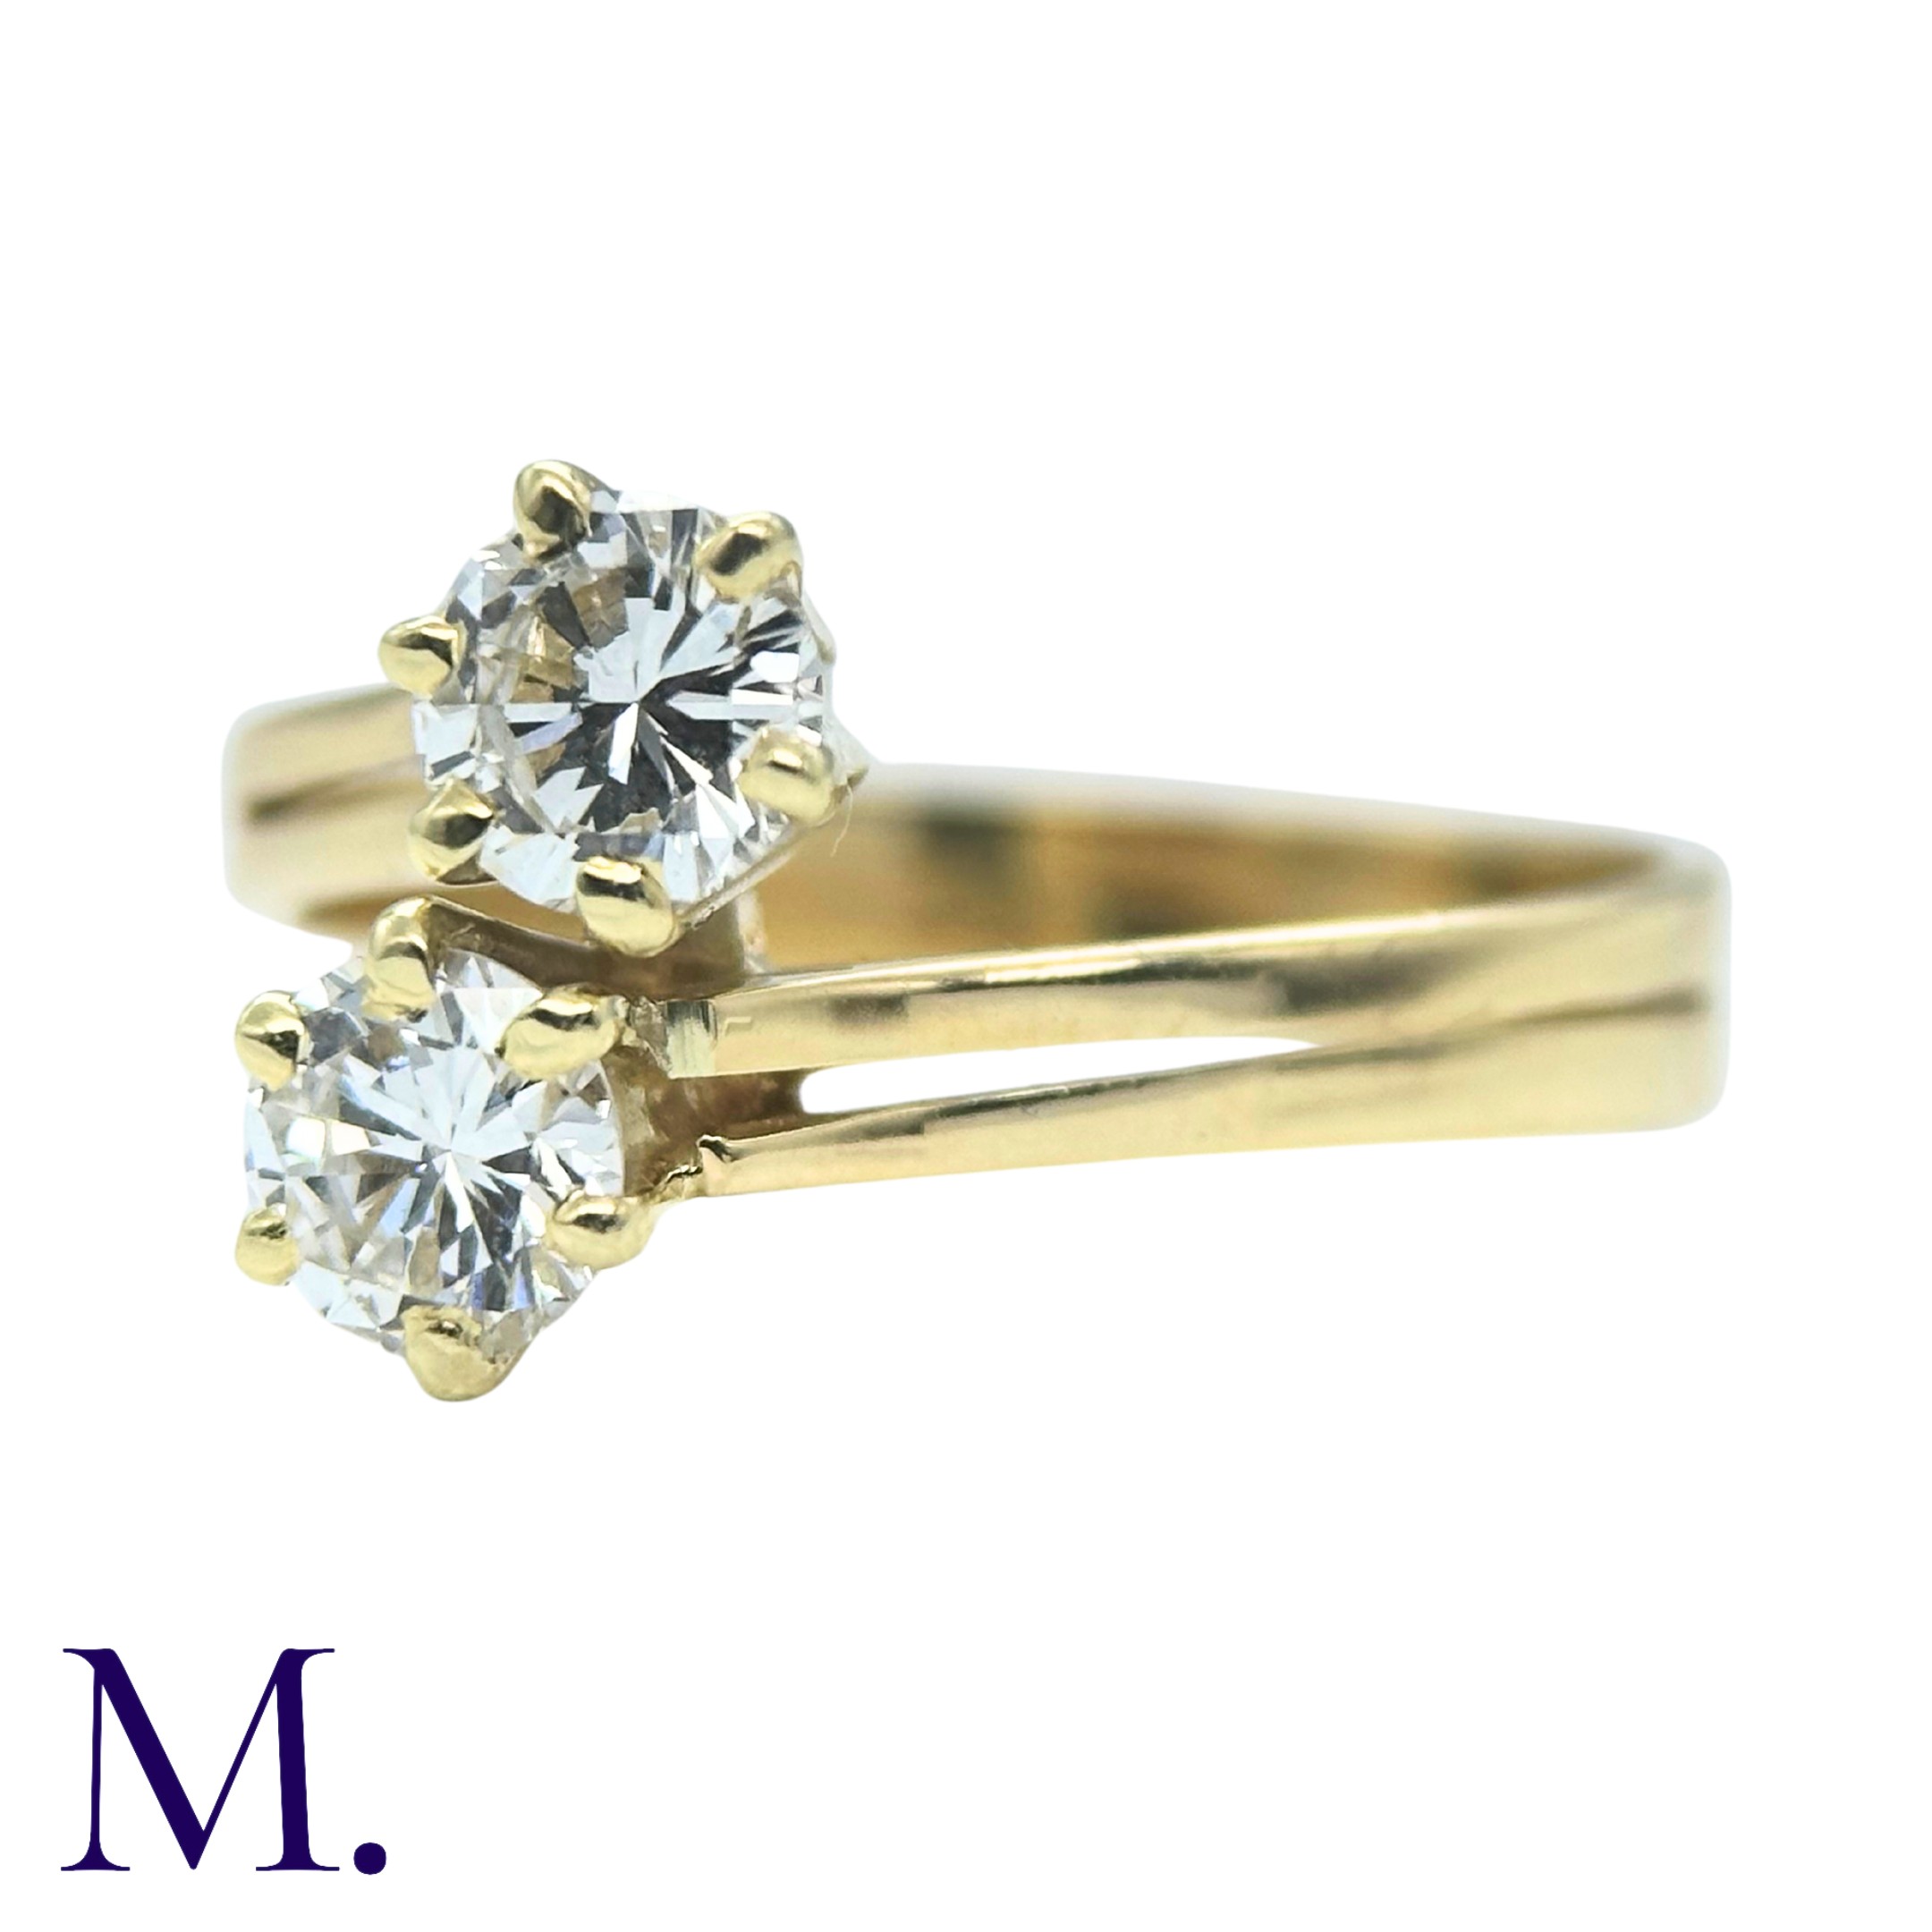 A Diamond 2-Stone Crossover Ring in 18K yellow gold, set with two round cut diamonds weighing - Image 2 of 4